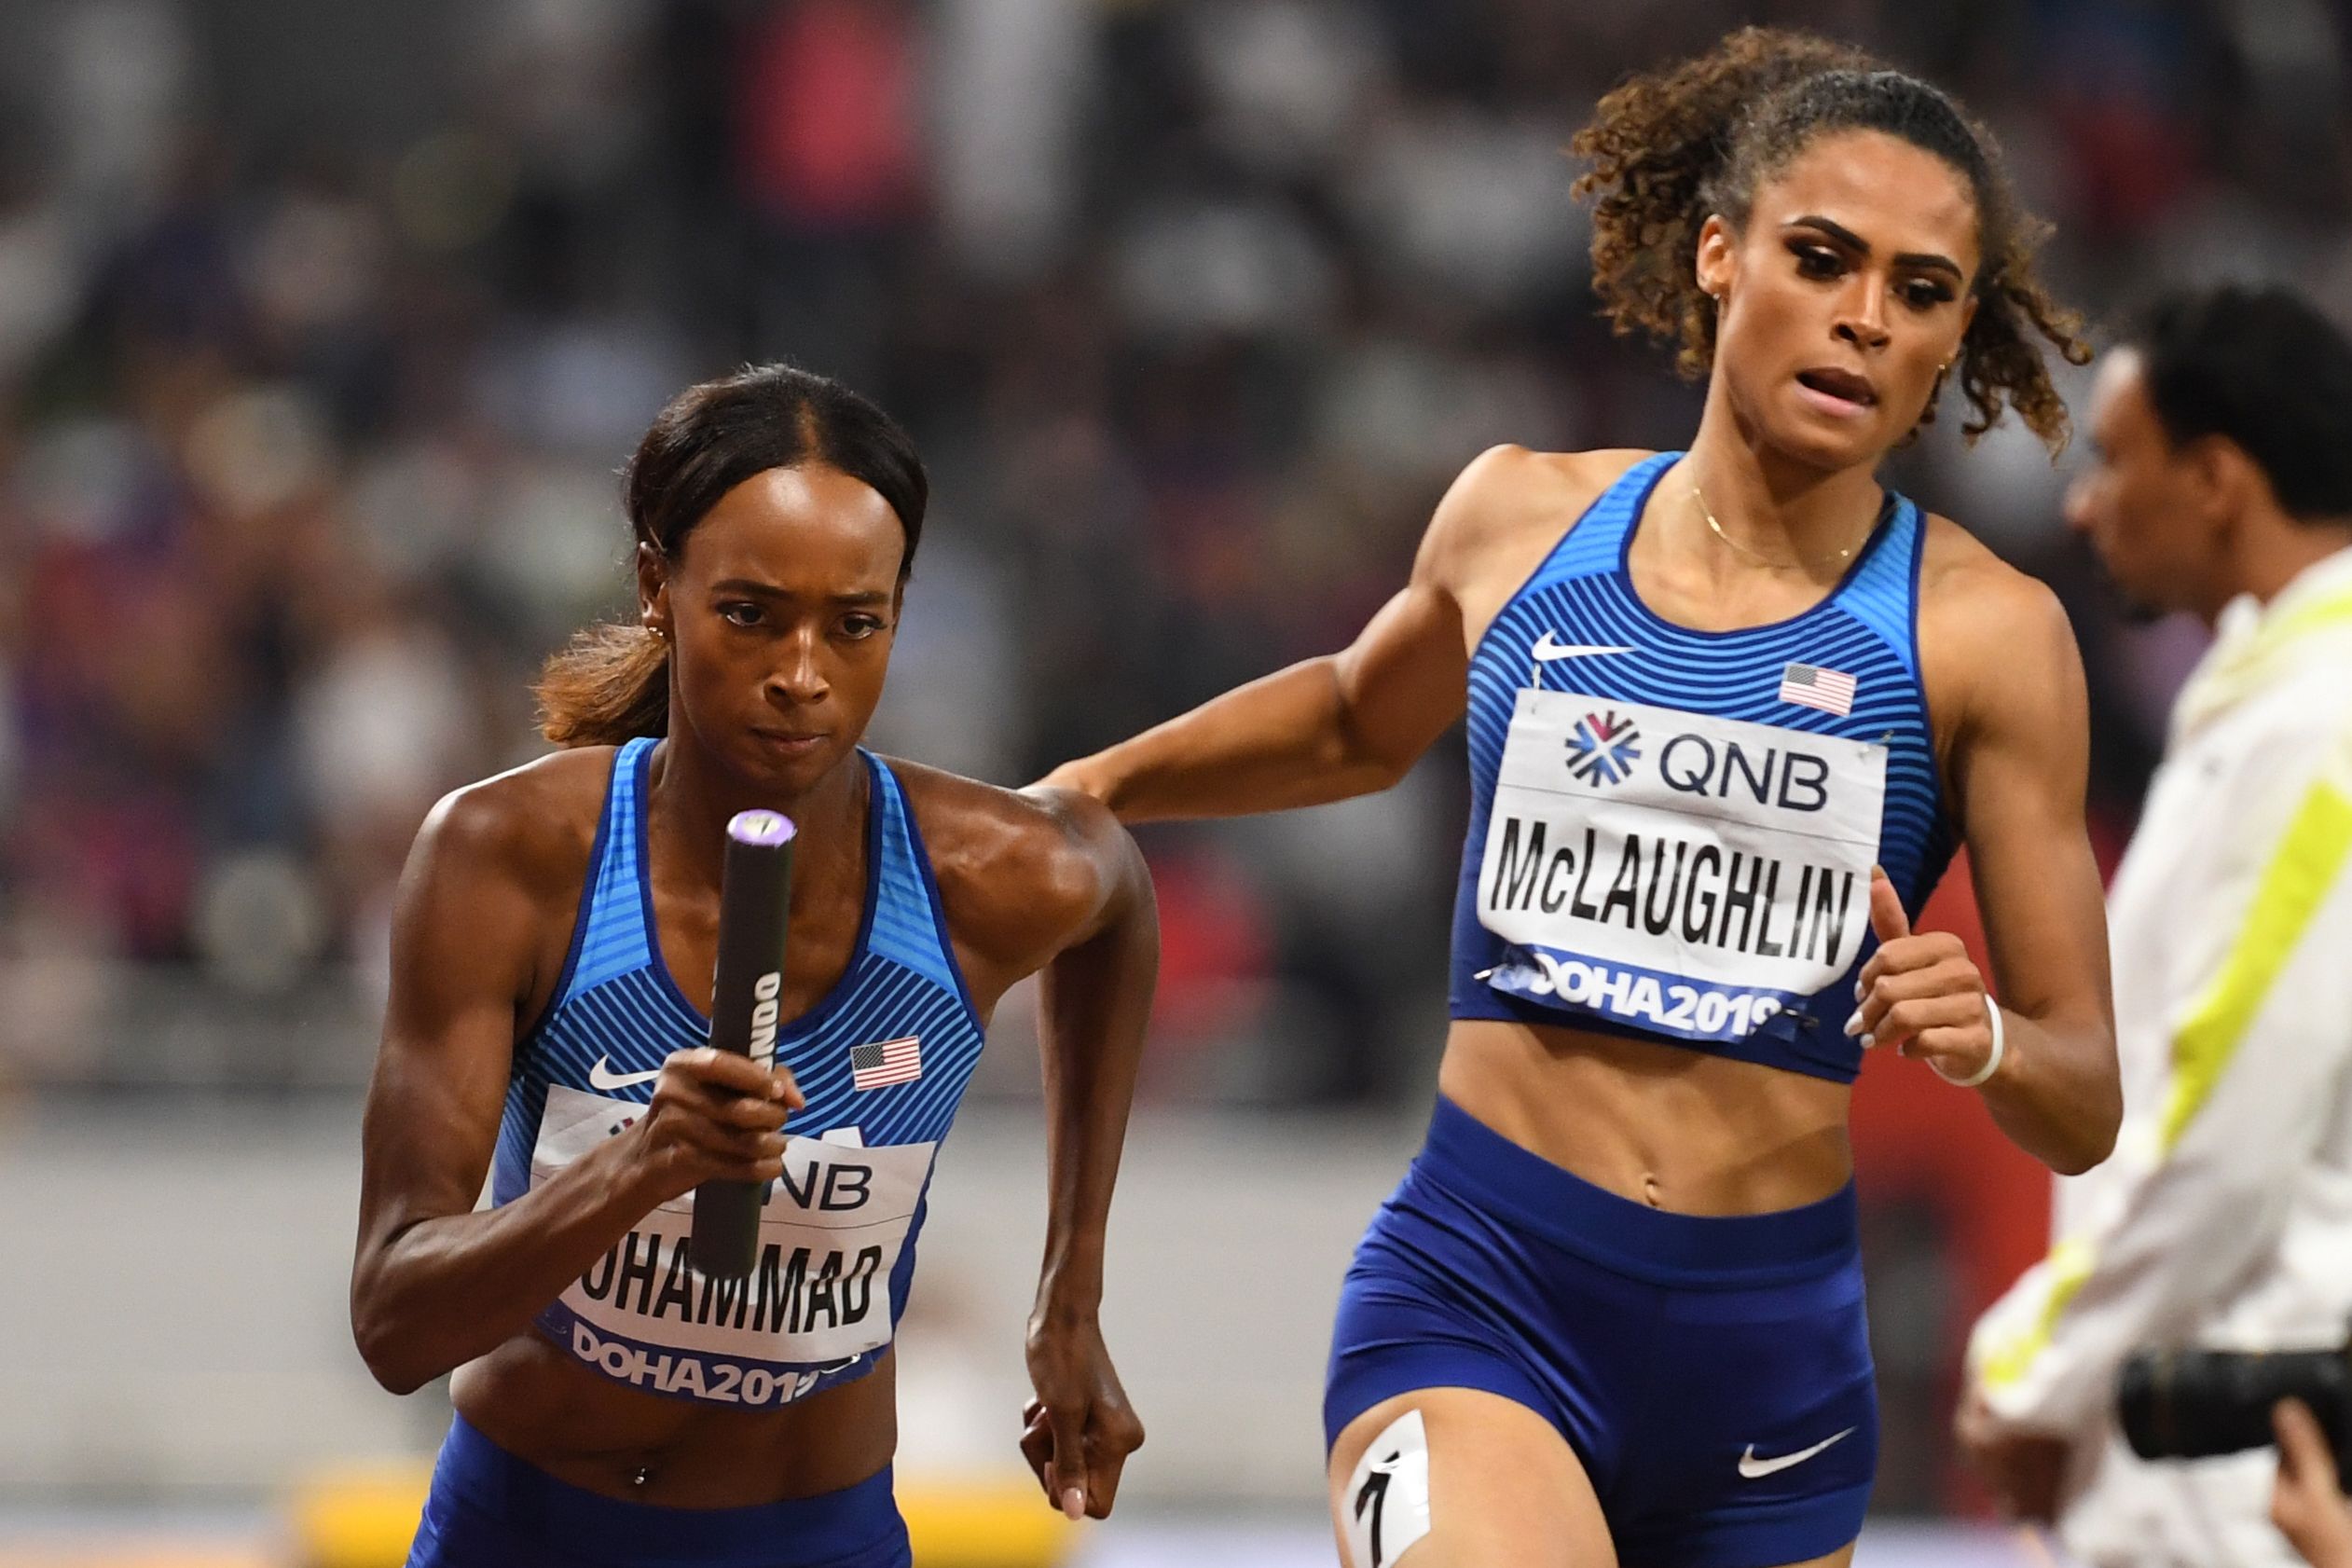 Dalilah Muhammad and Sydney McLaughlin in the 4x400m in Doha